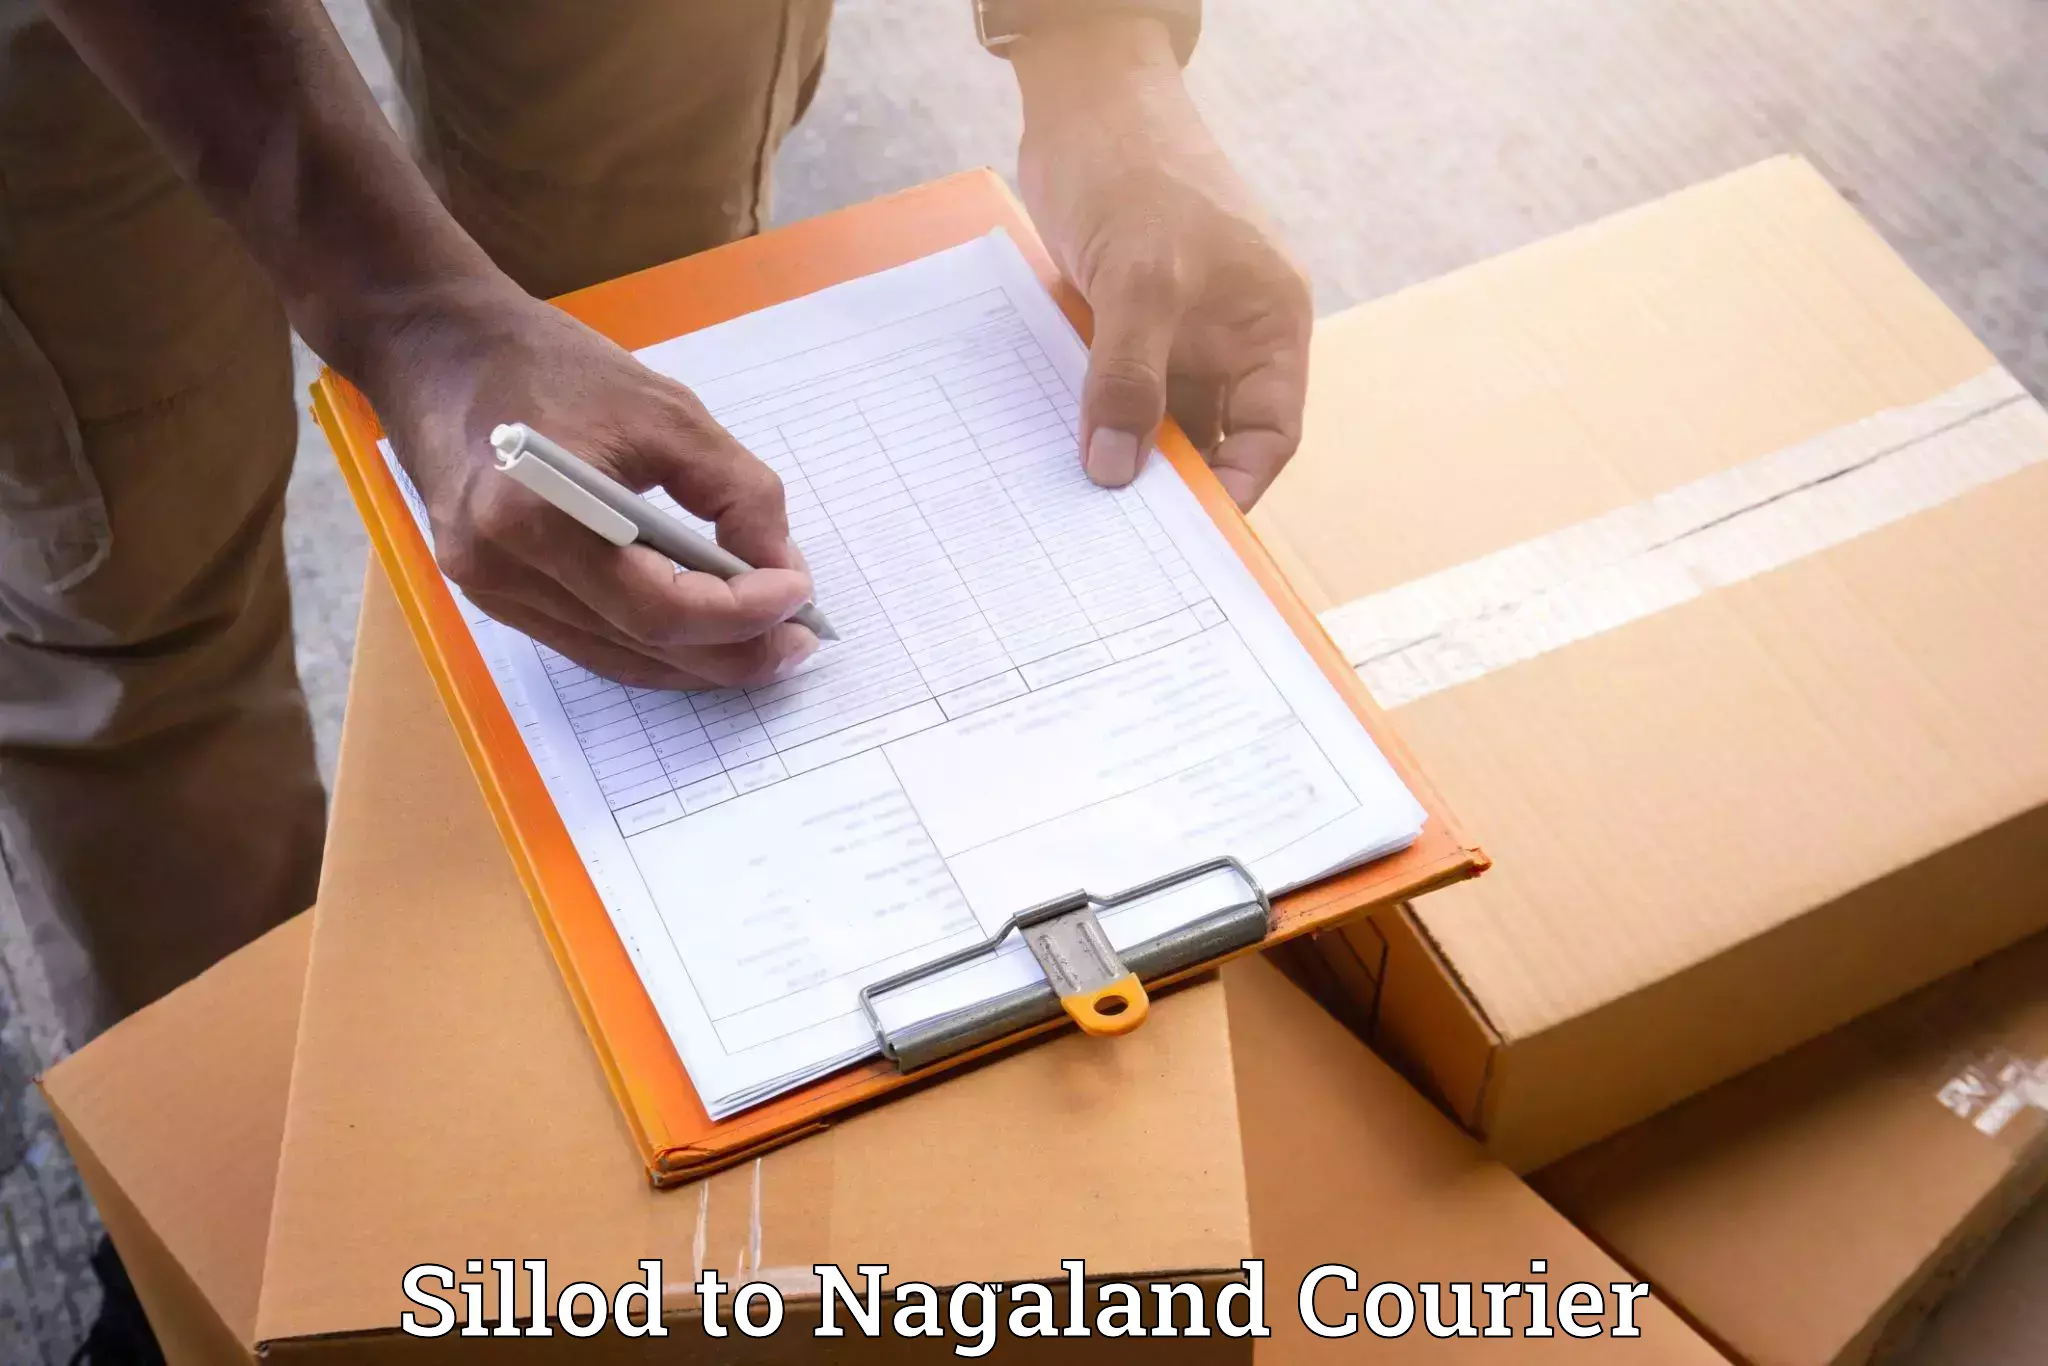 Household goods transport service in Sillod to Nagaland